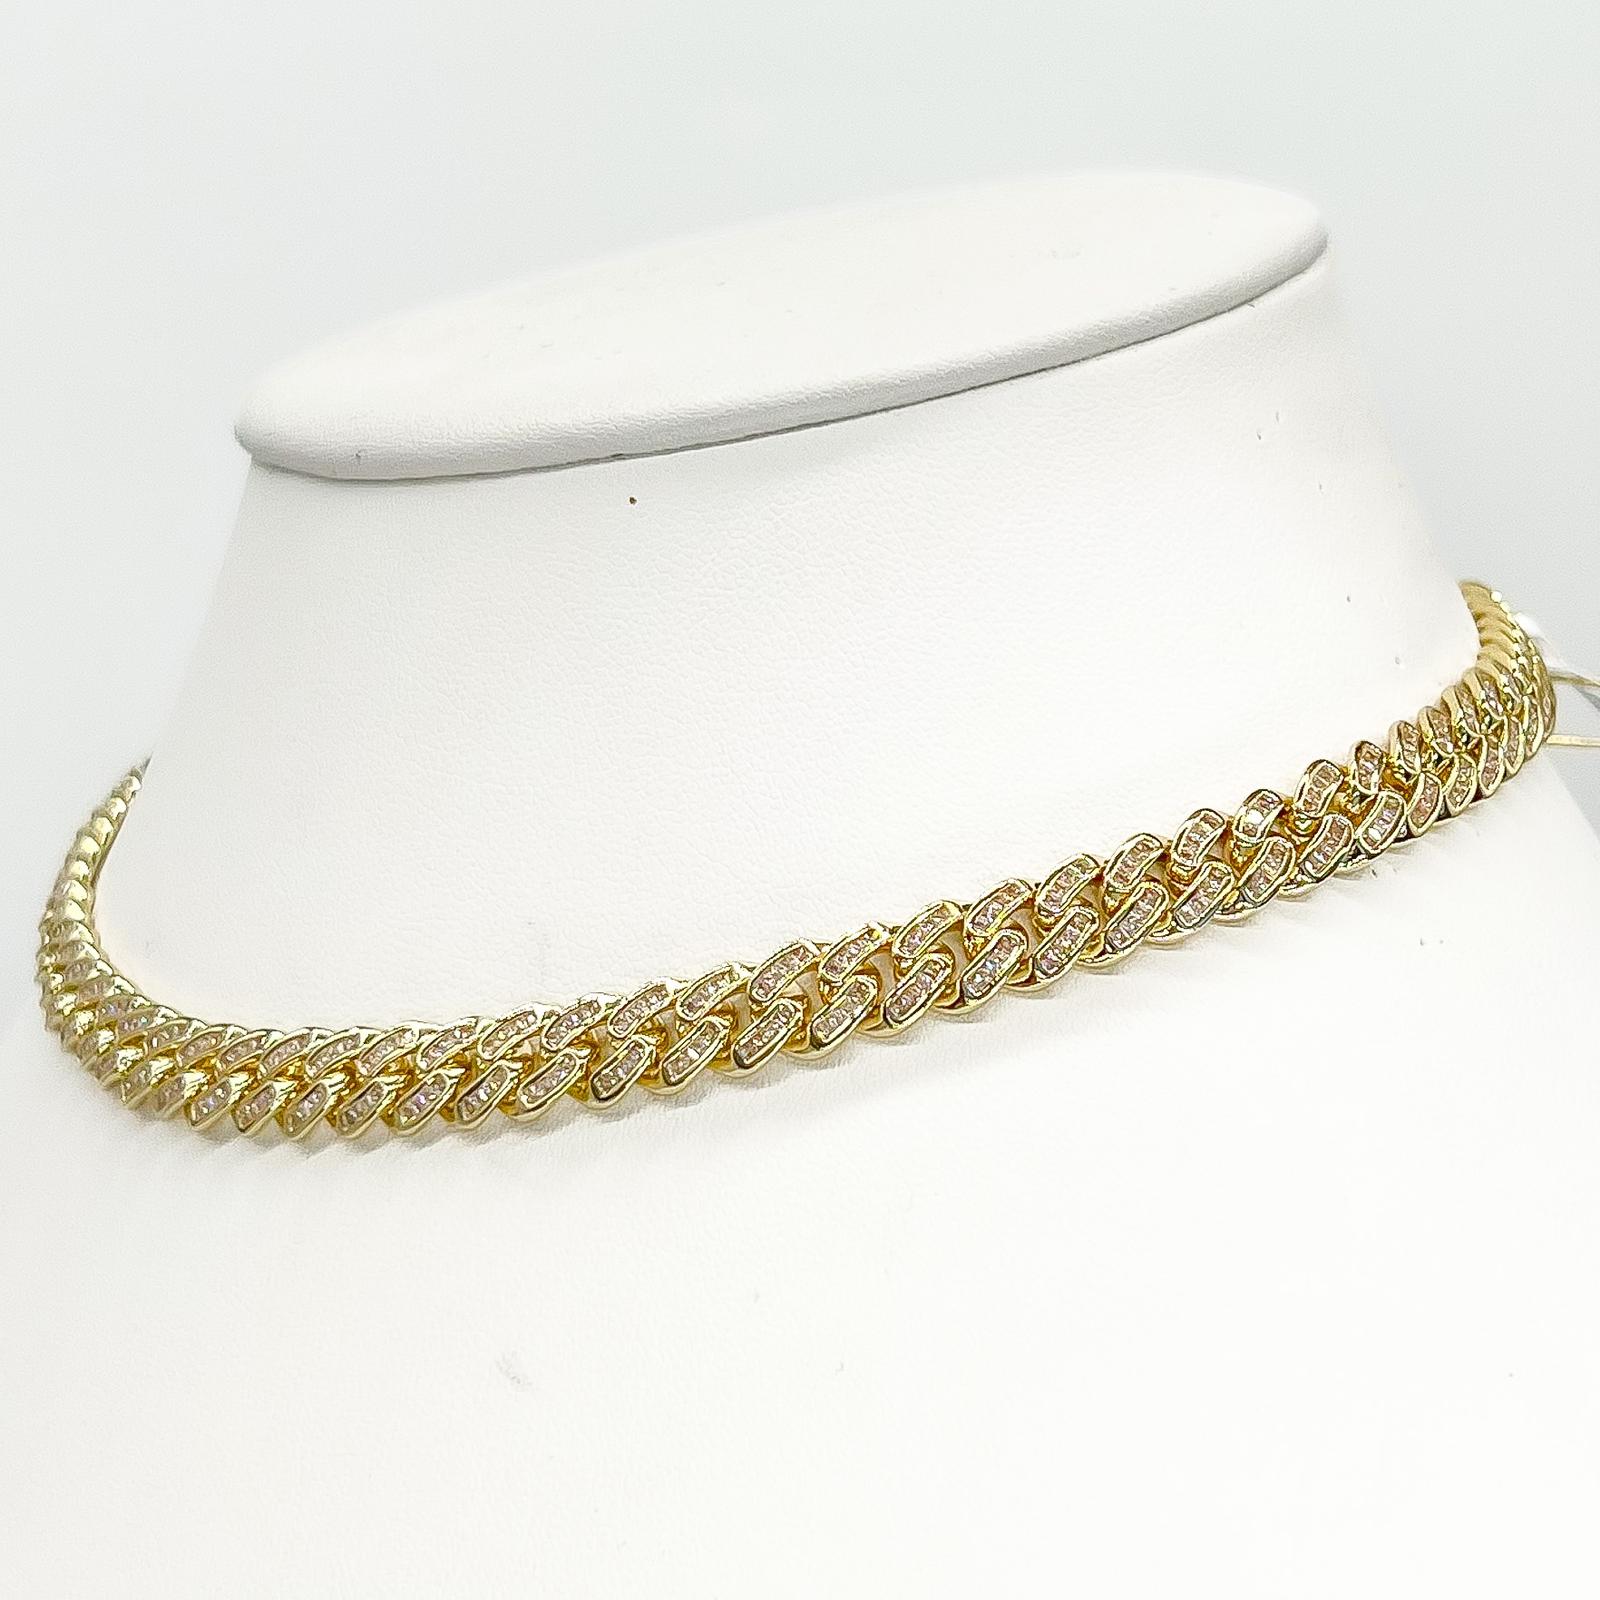 12mm CZ VVS Miami Cuban Link Chain Iced Choker Necklace 14k Gold Finish Out  ICY